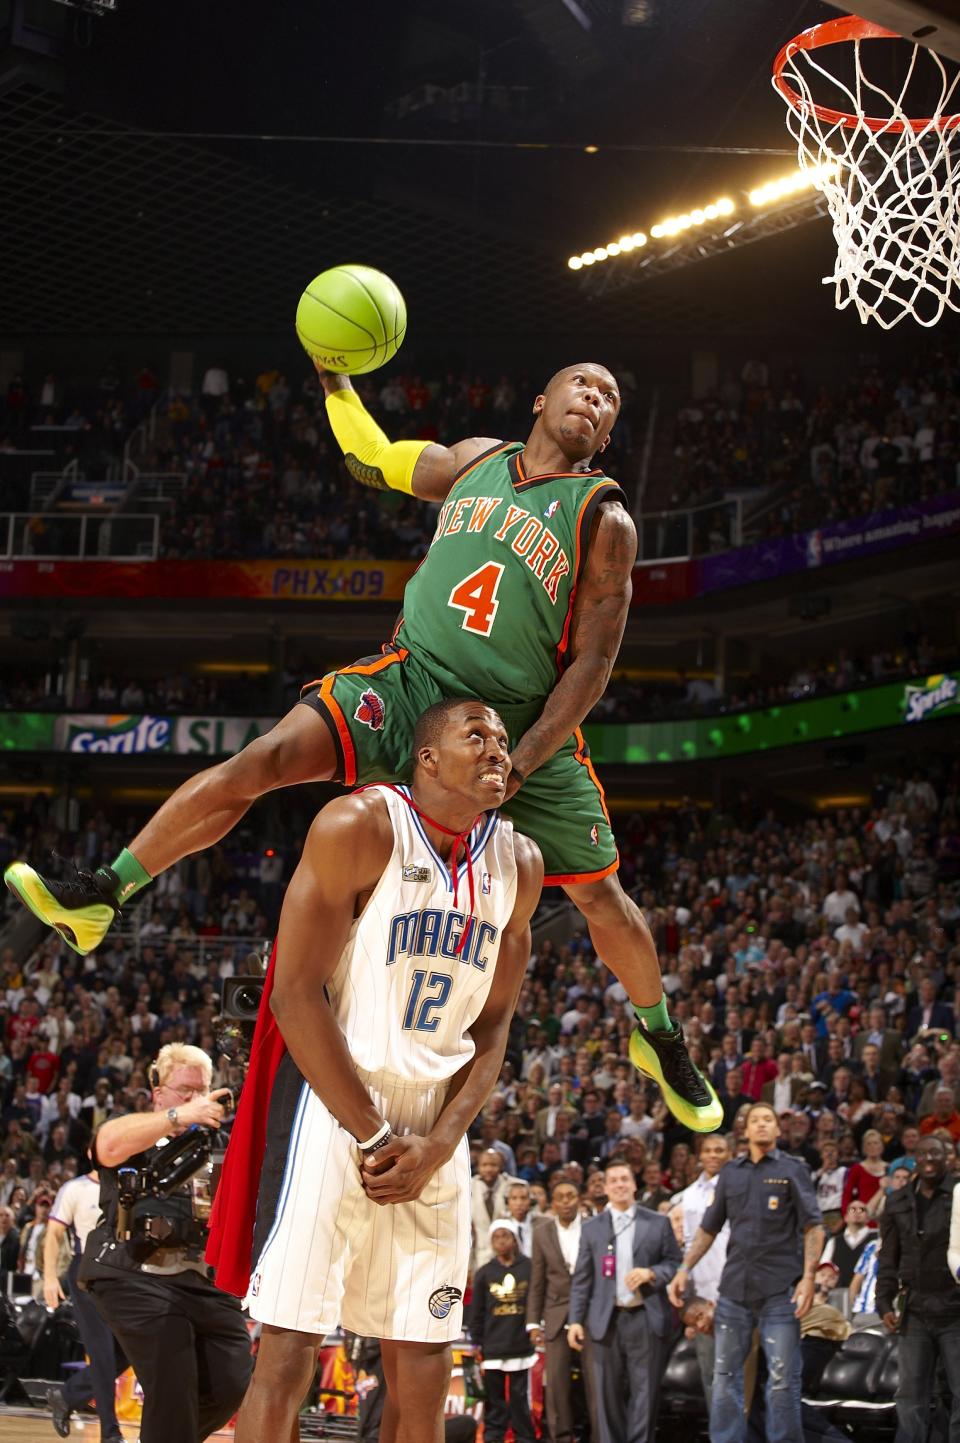 One of Robinson's most memorable dunks came in 2009 when he jumped over Dwight Howard